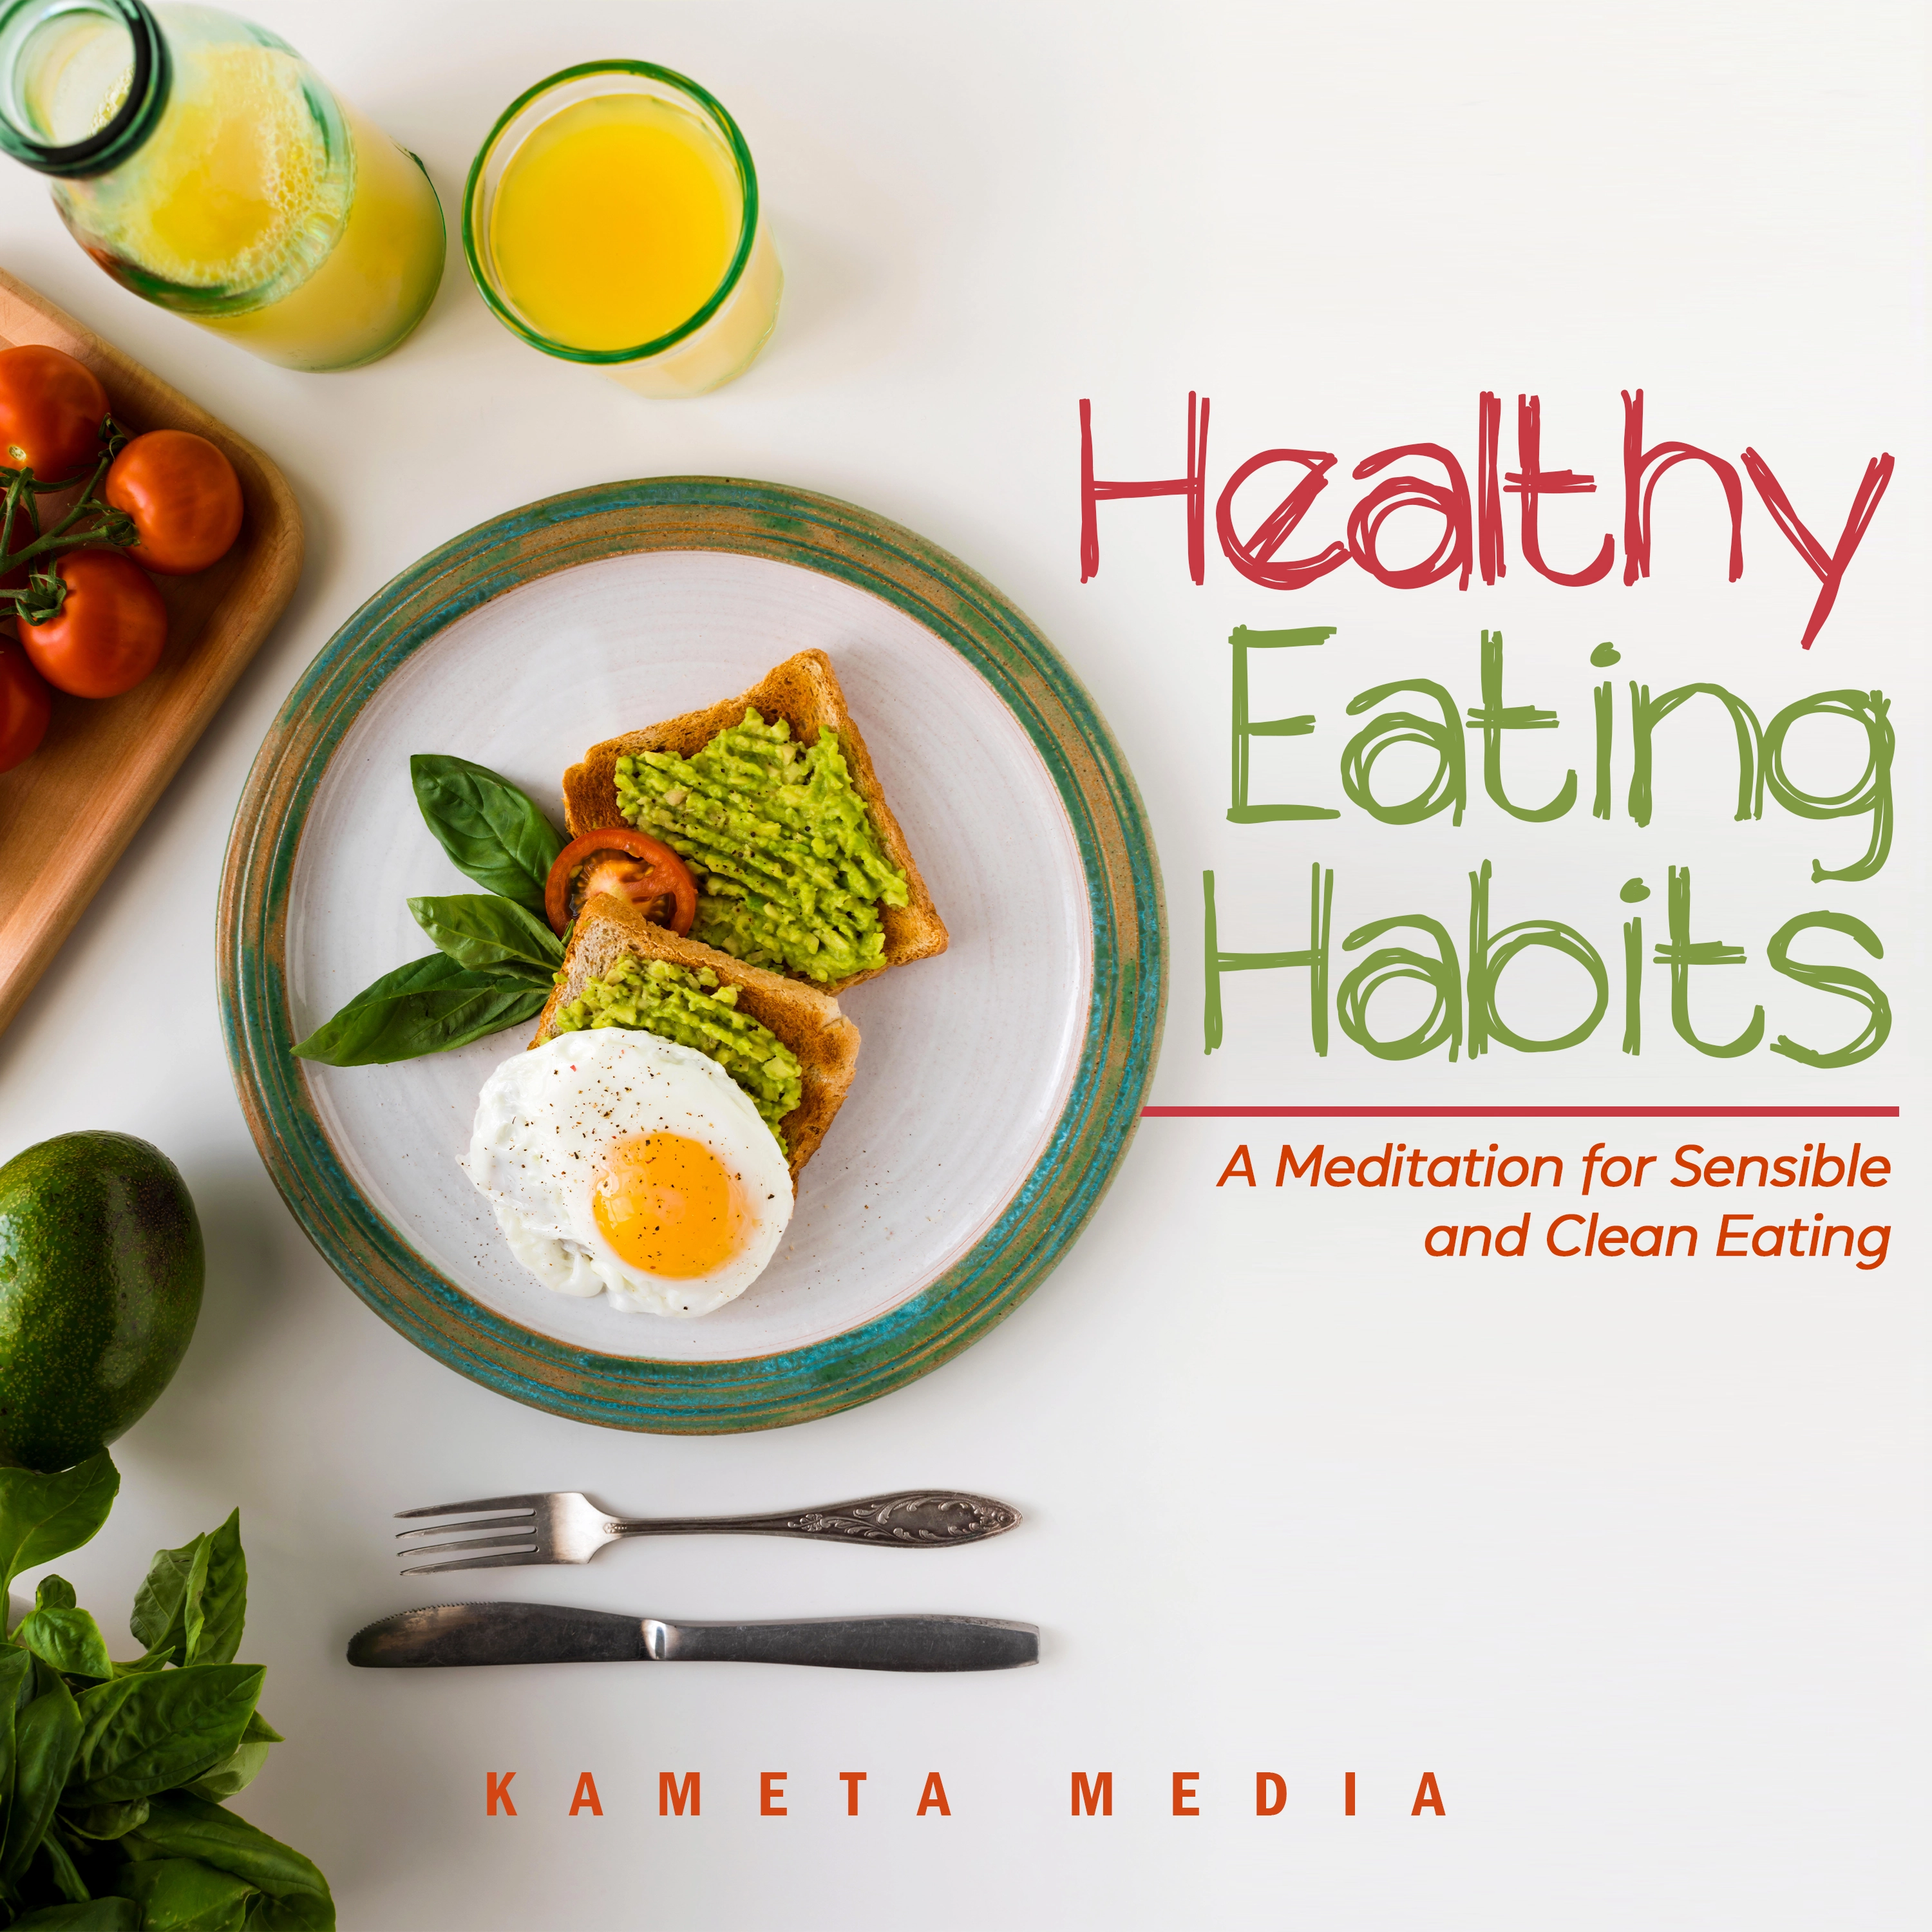 Healthy Eating Habits: A Meditation for Sensible and Clean Eating Audiobook by Kameta Media